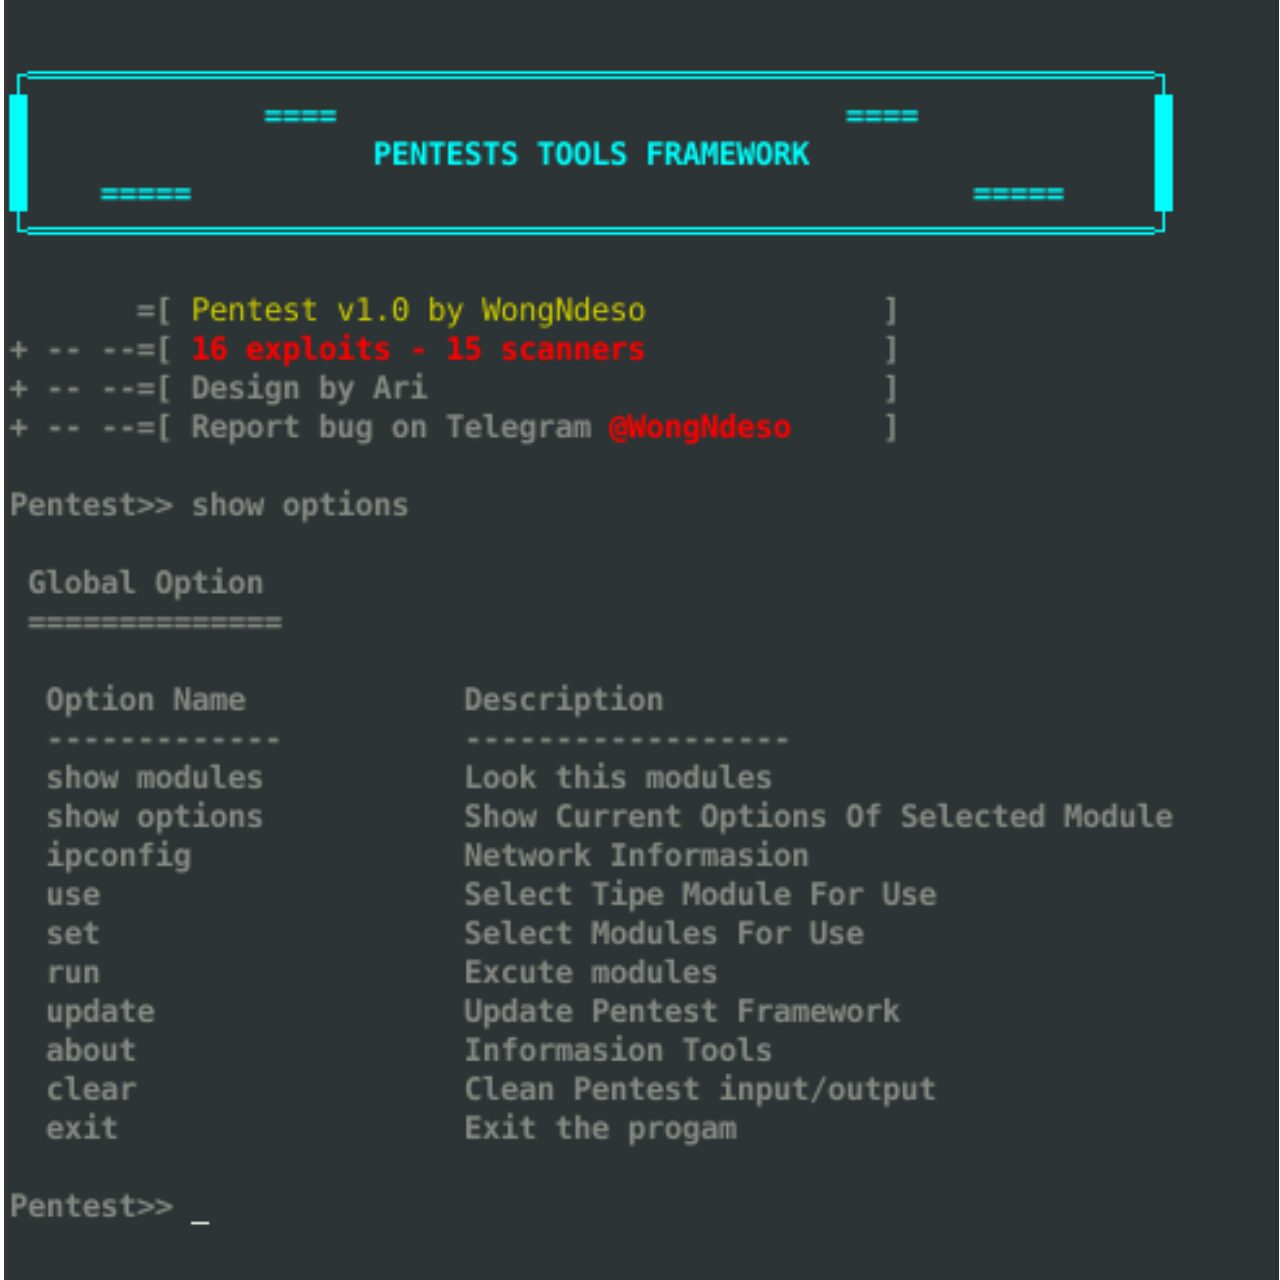 Pentest Tools Framework: database of exploits, Scanners and tools for